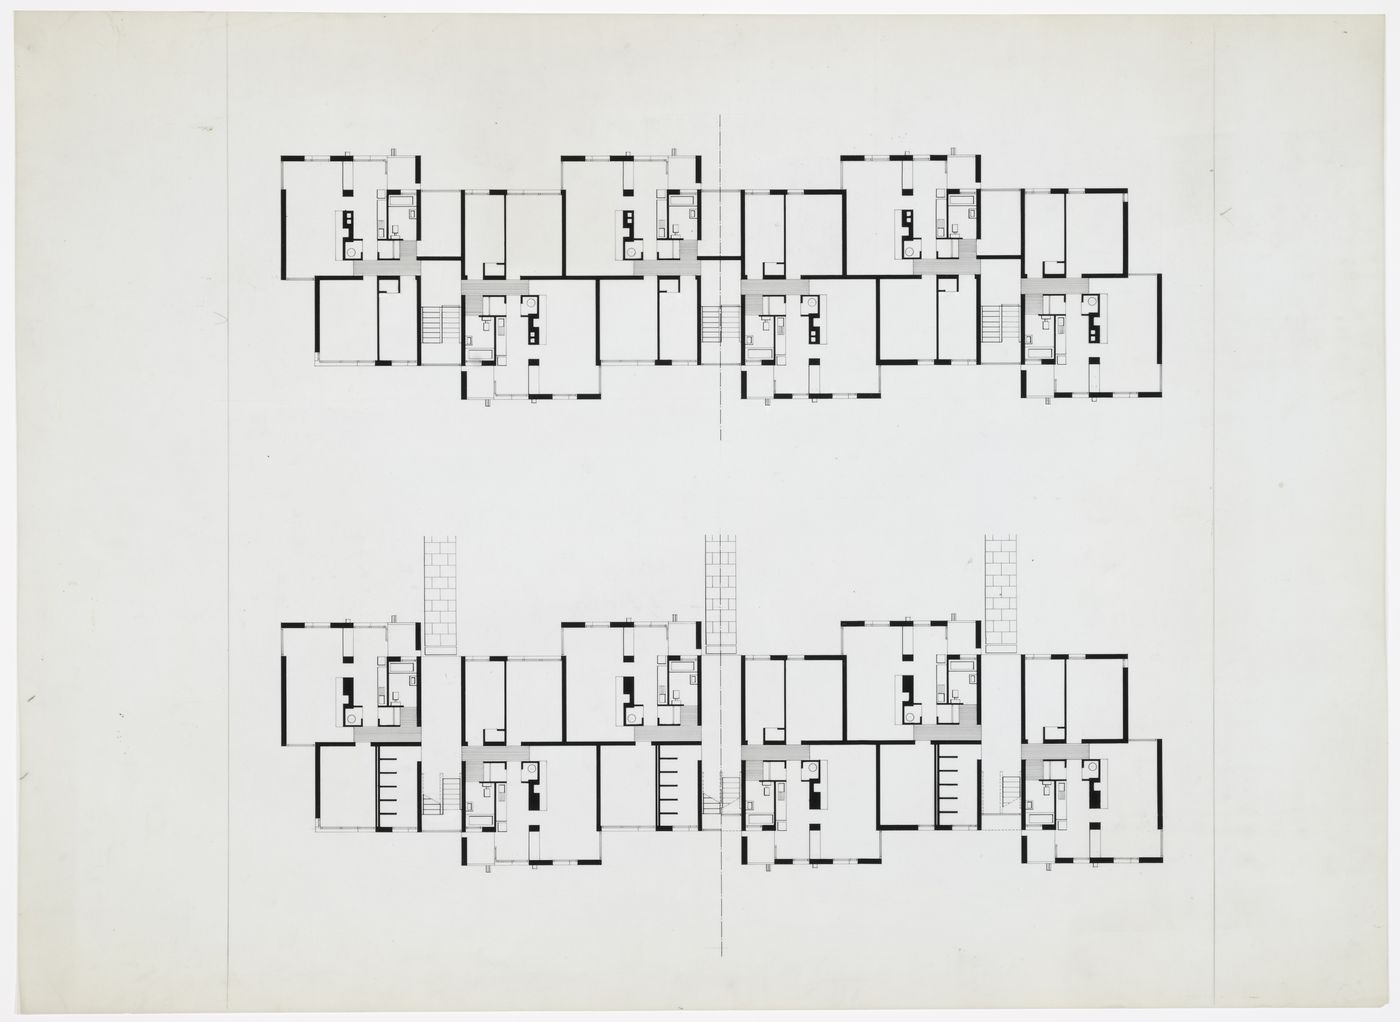 Plan for the two-storey block of flats, Ham Common Flats, London, England